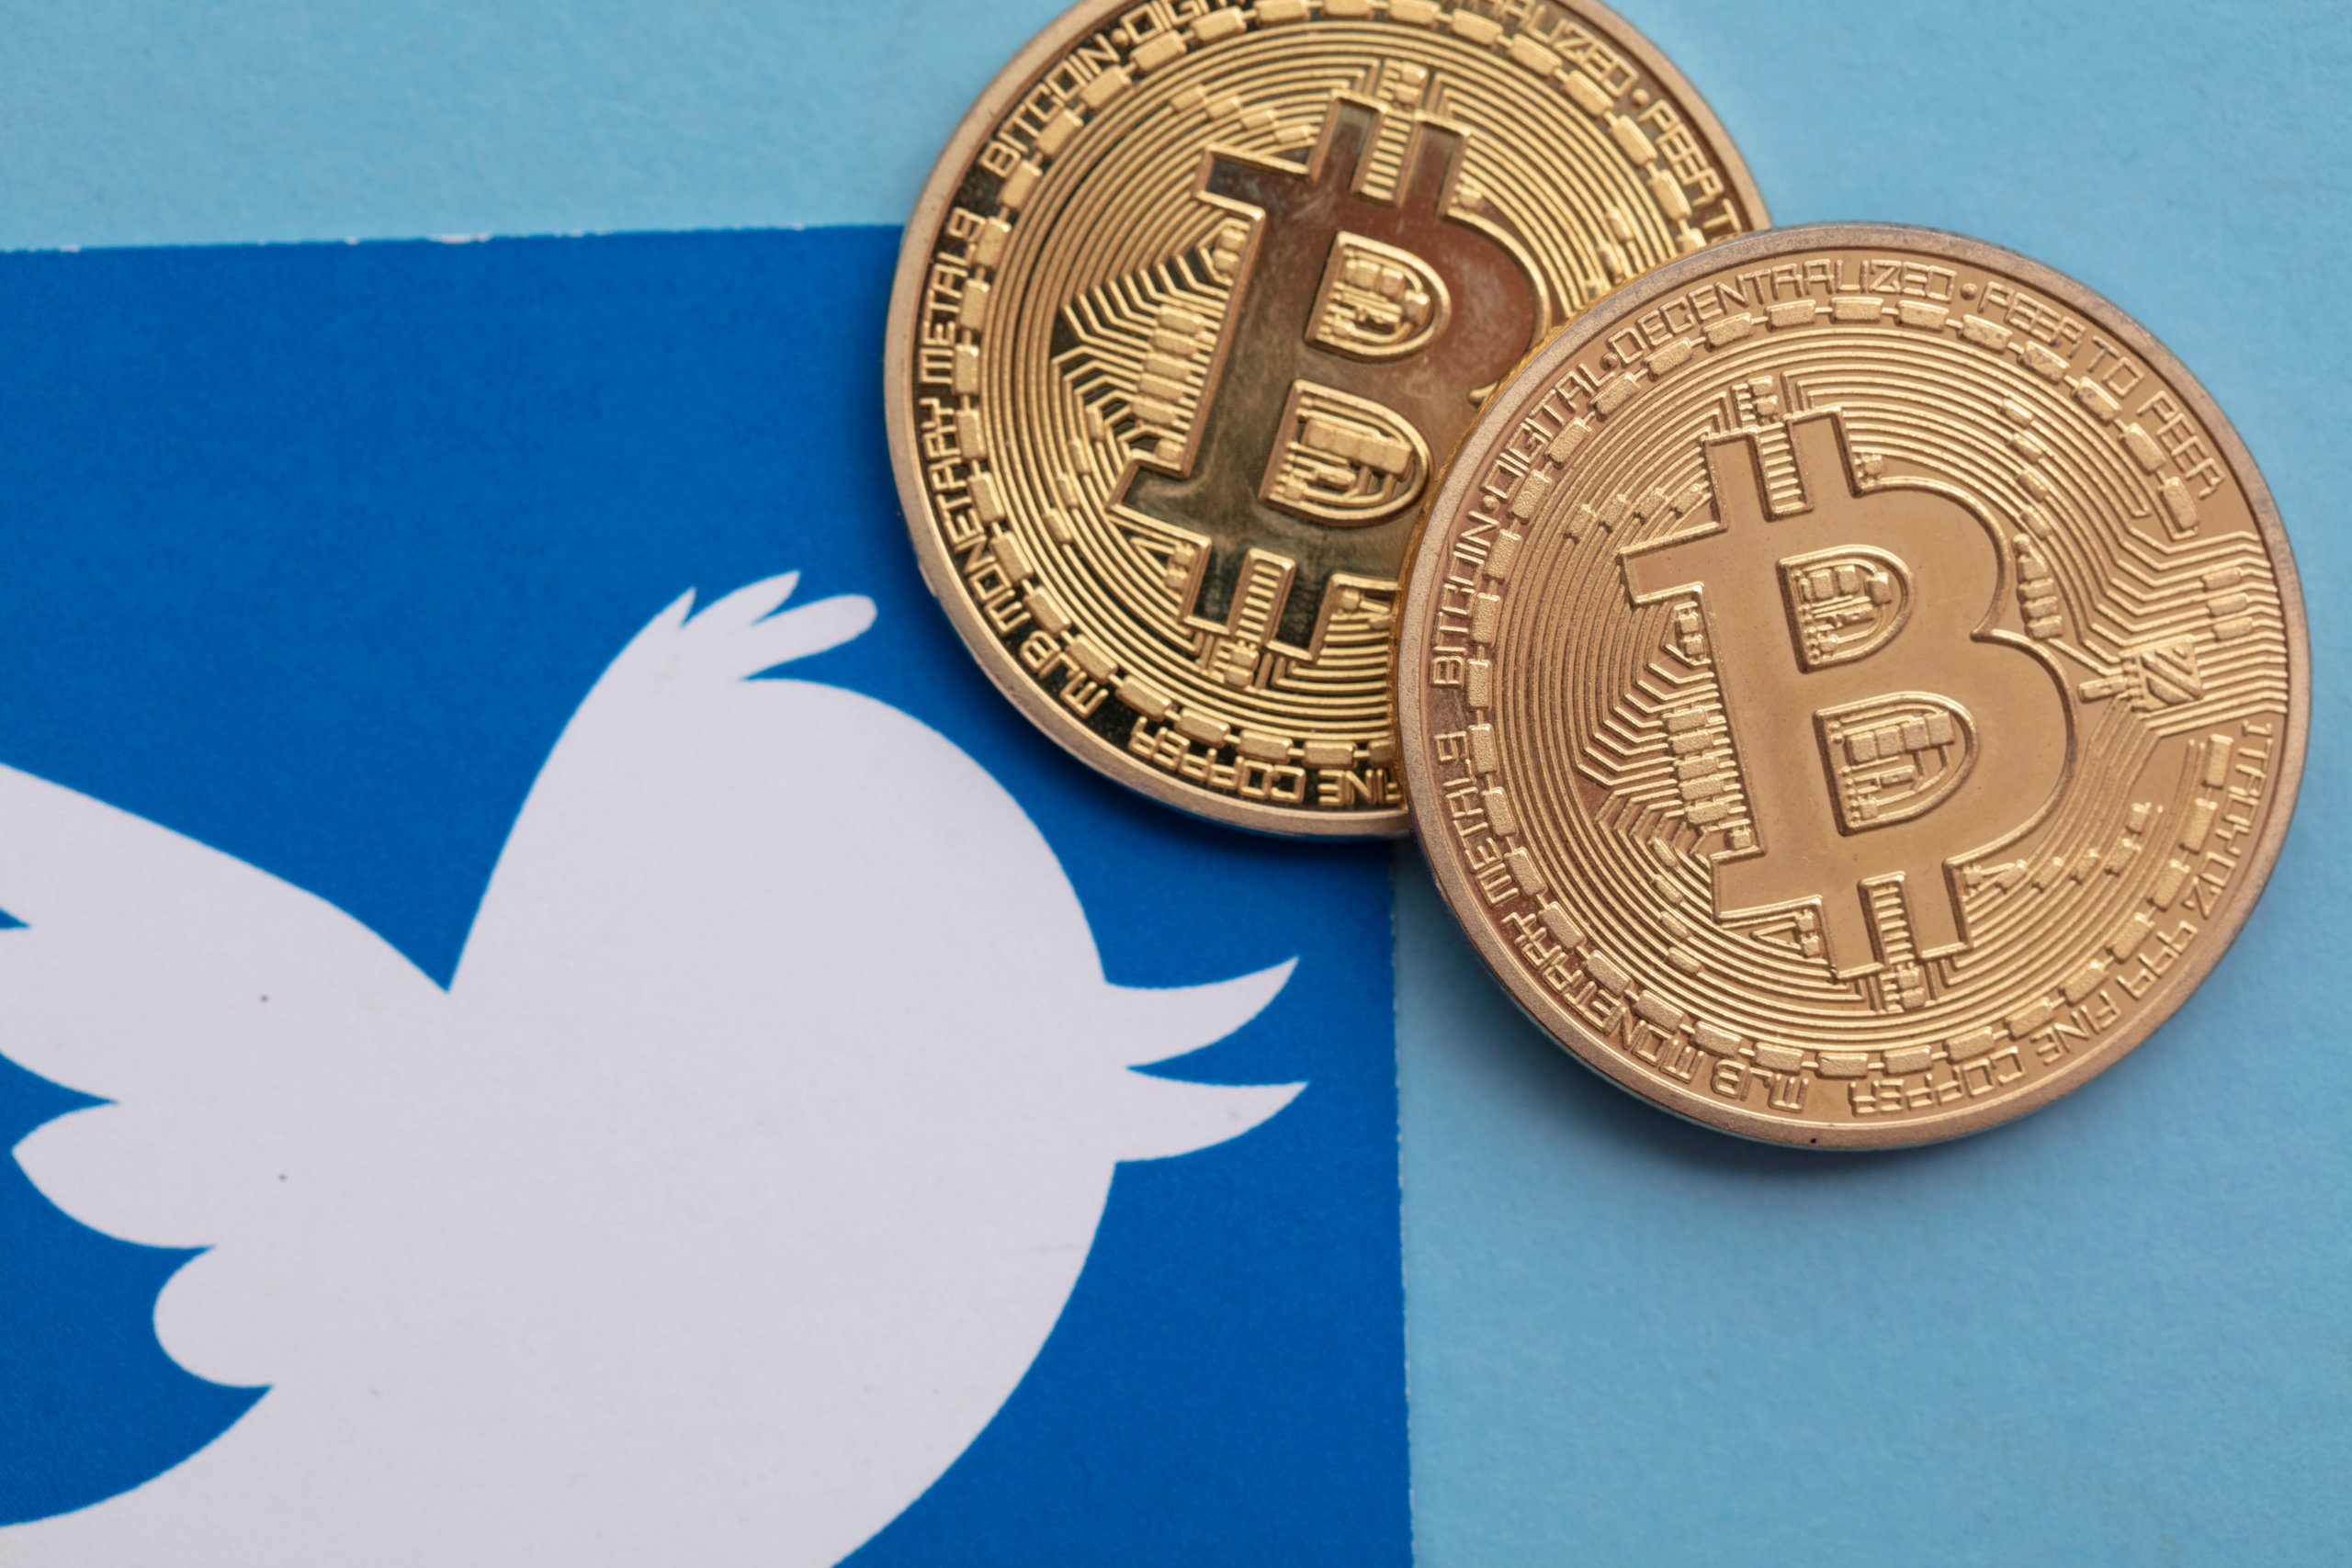  twitter android tip jar reportedly bitcoin testing 